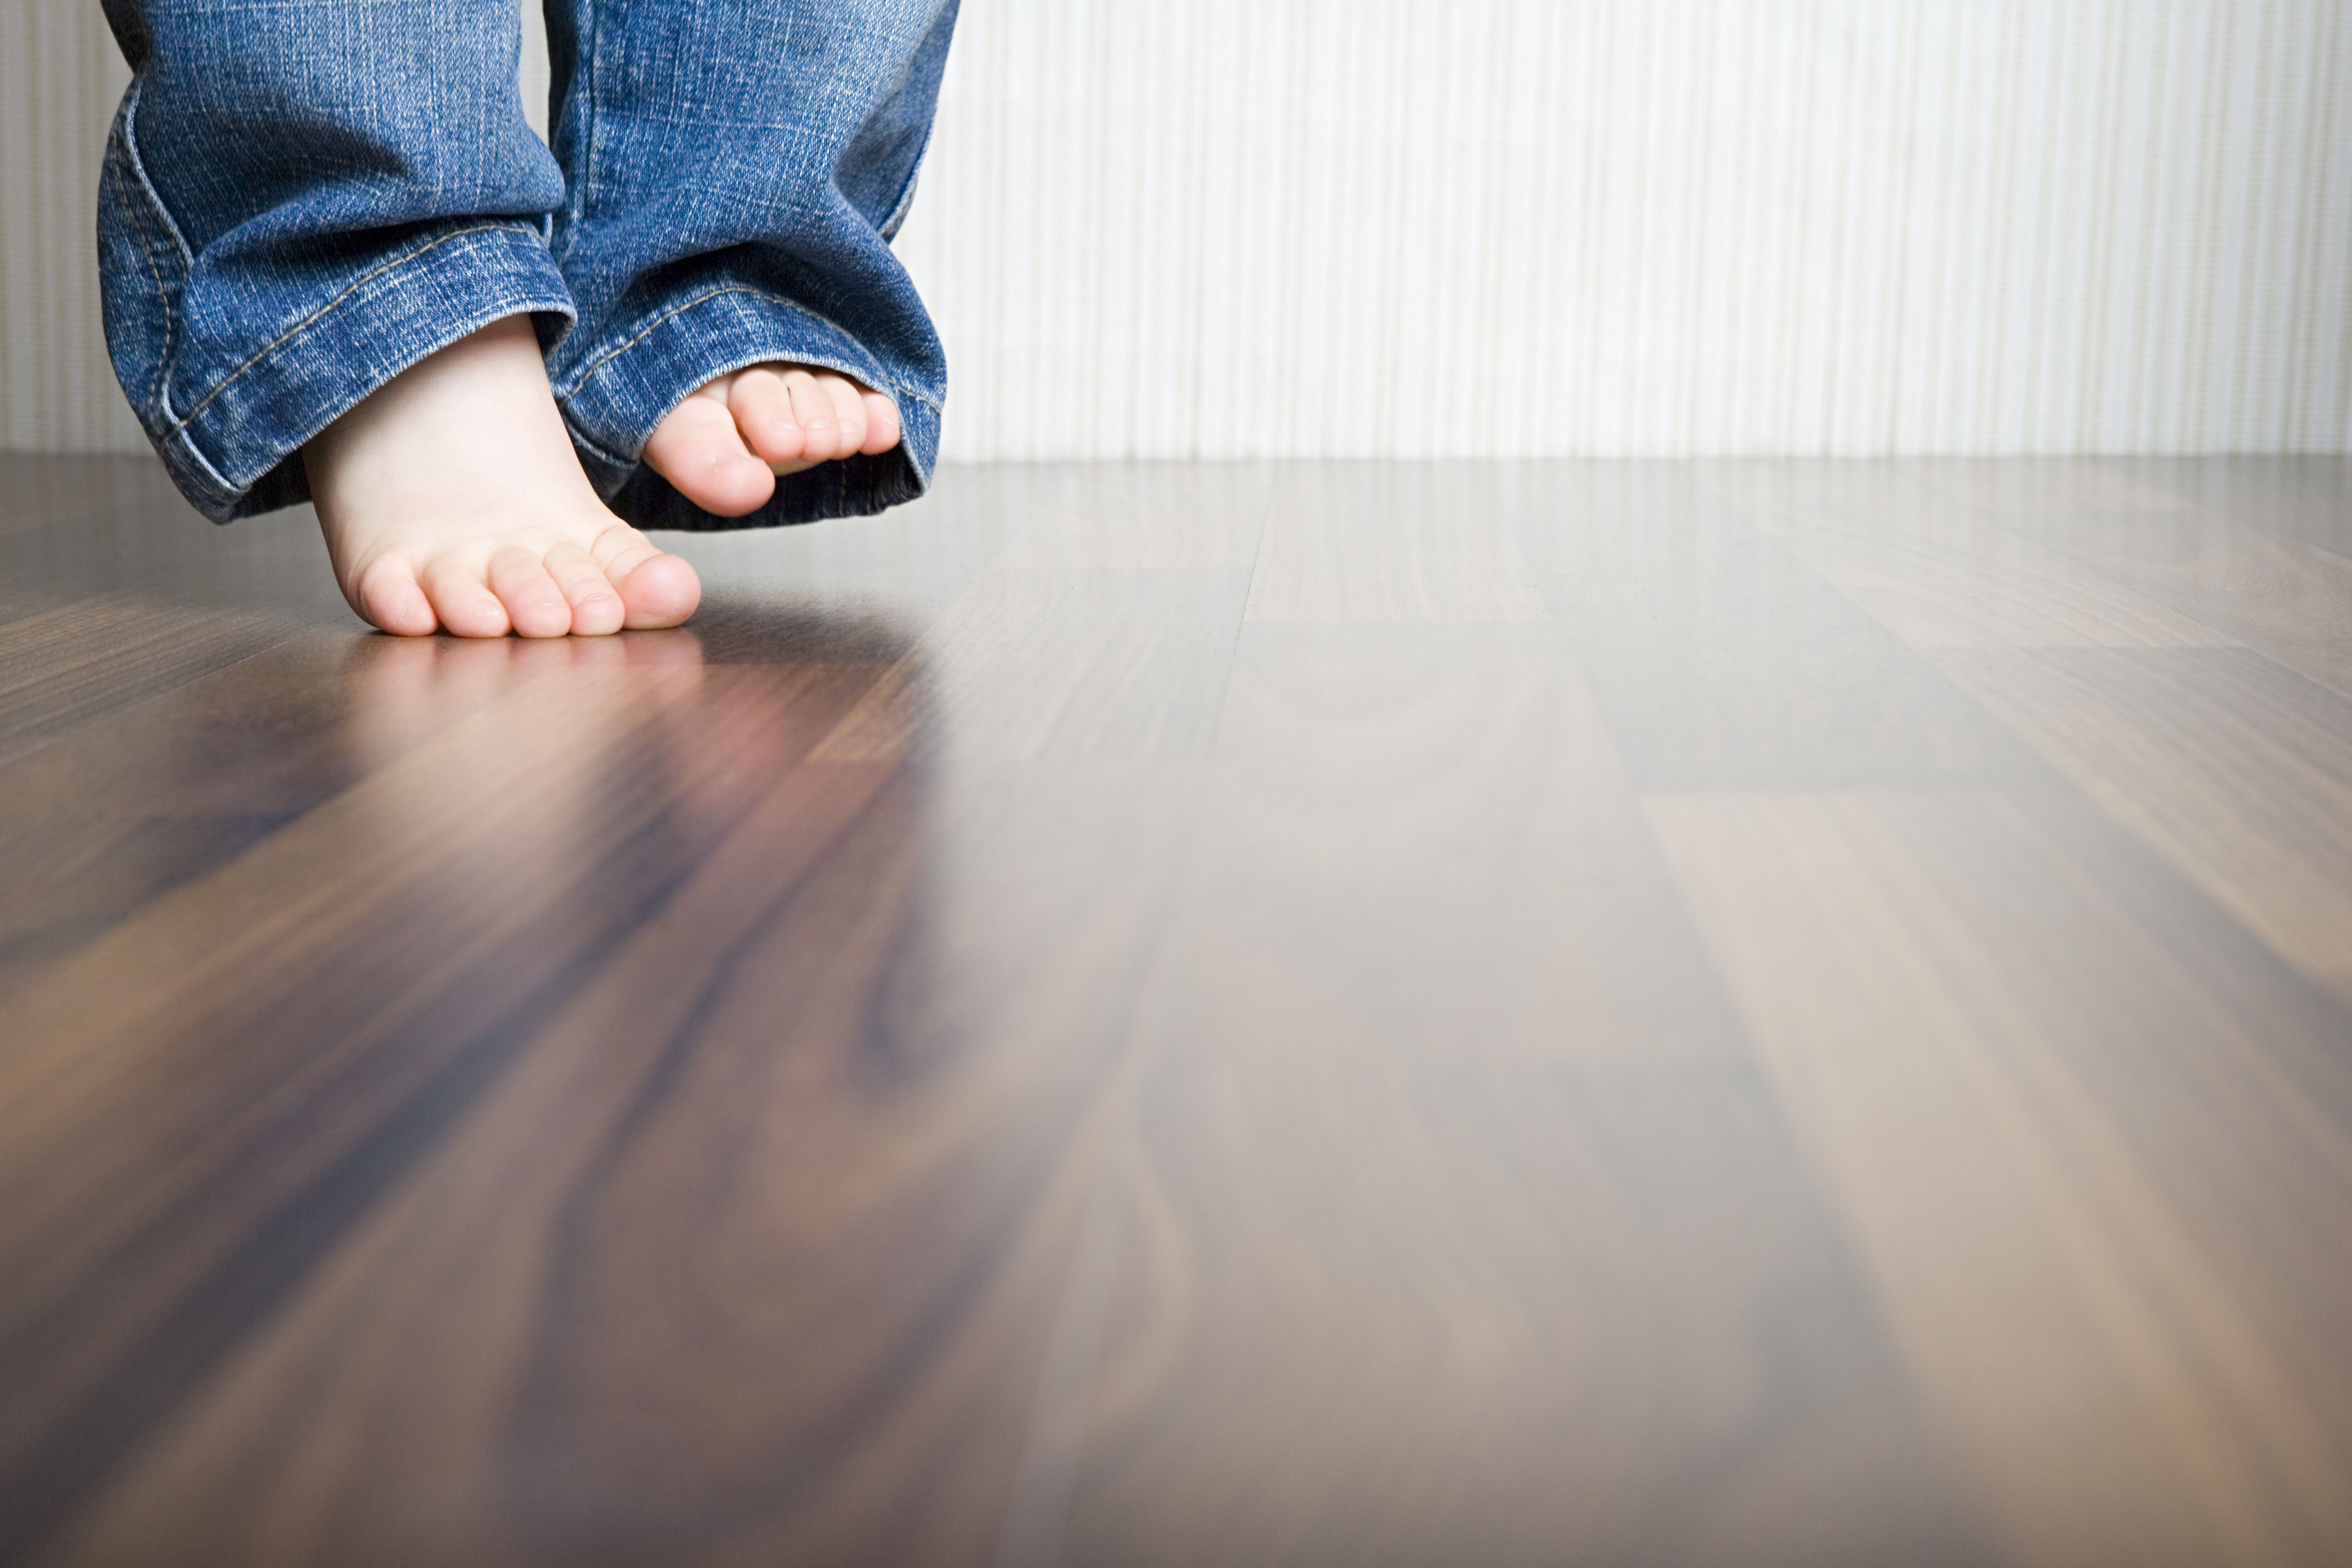 engineered hardwood flooring 3 8 vs 1 2 of how to clean hardwood floors best way to clean wood flooring within 1512149908 gettyimages 75403973